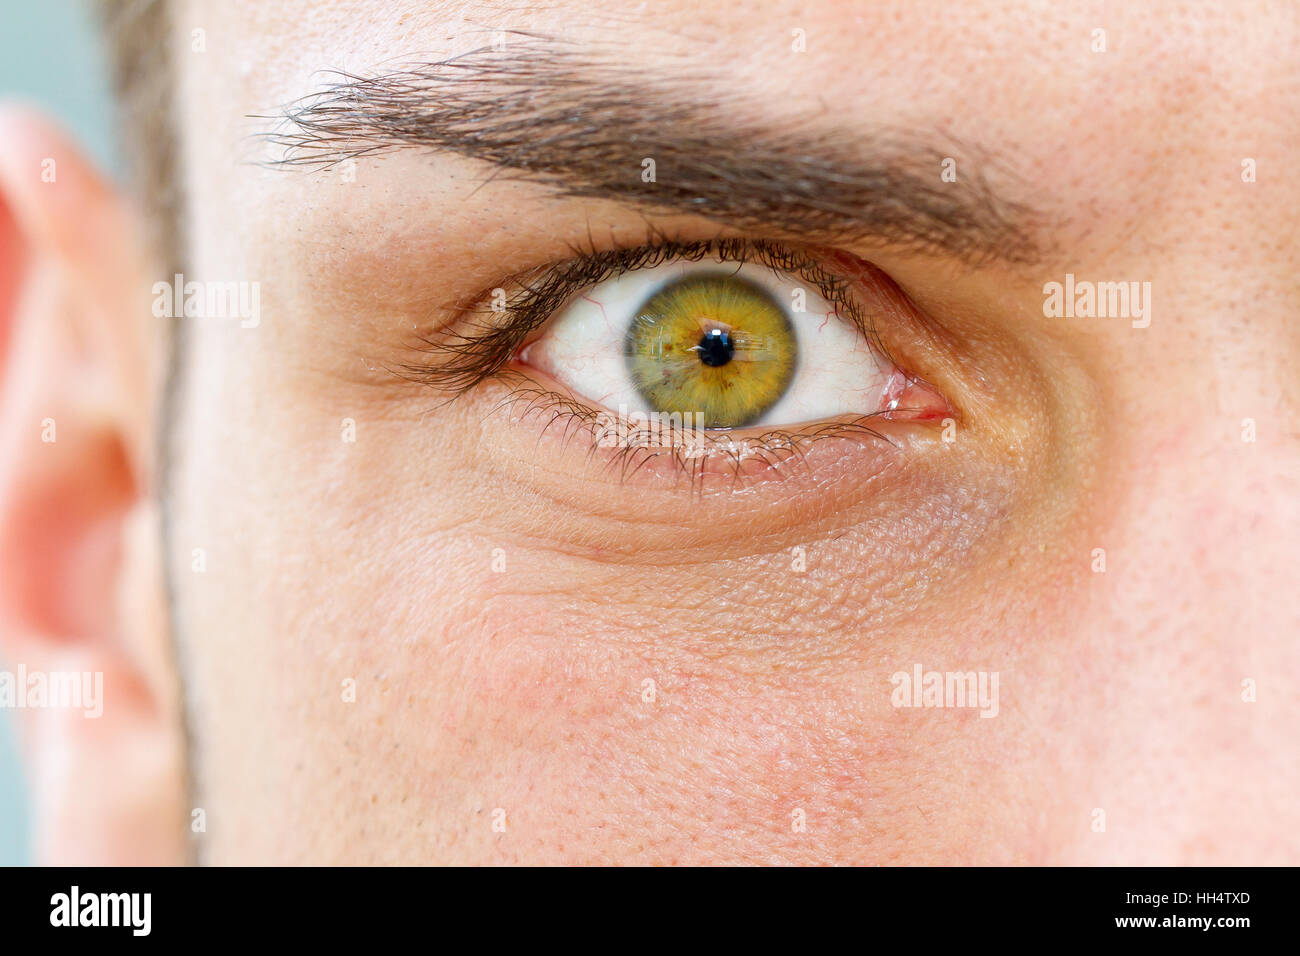 Staring eye of a young man Stock Photo